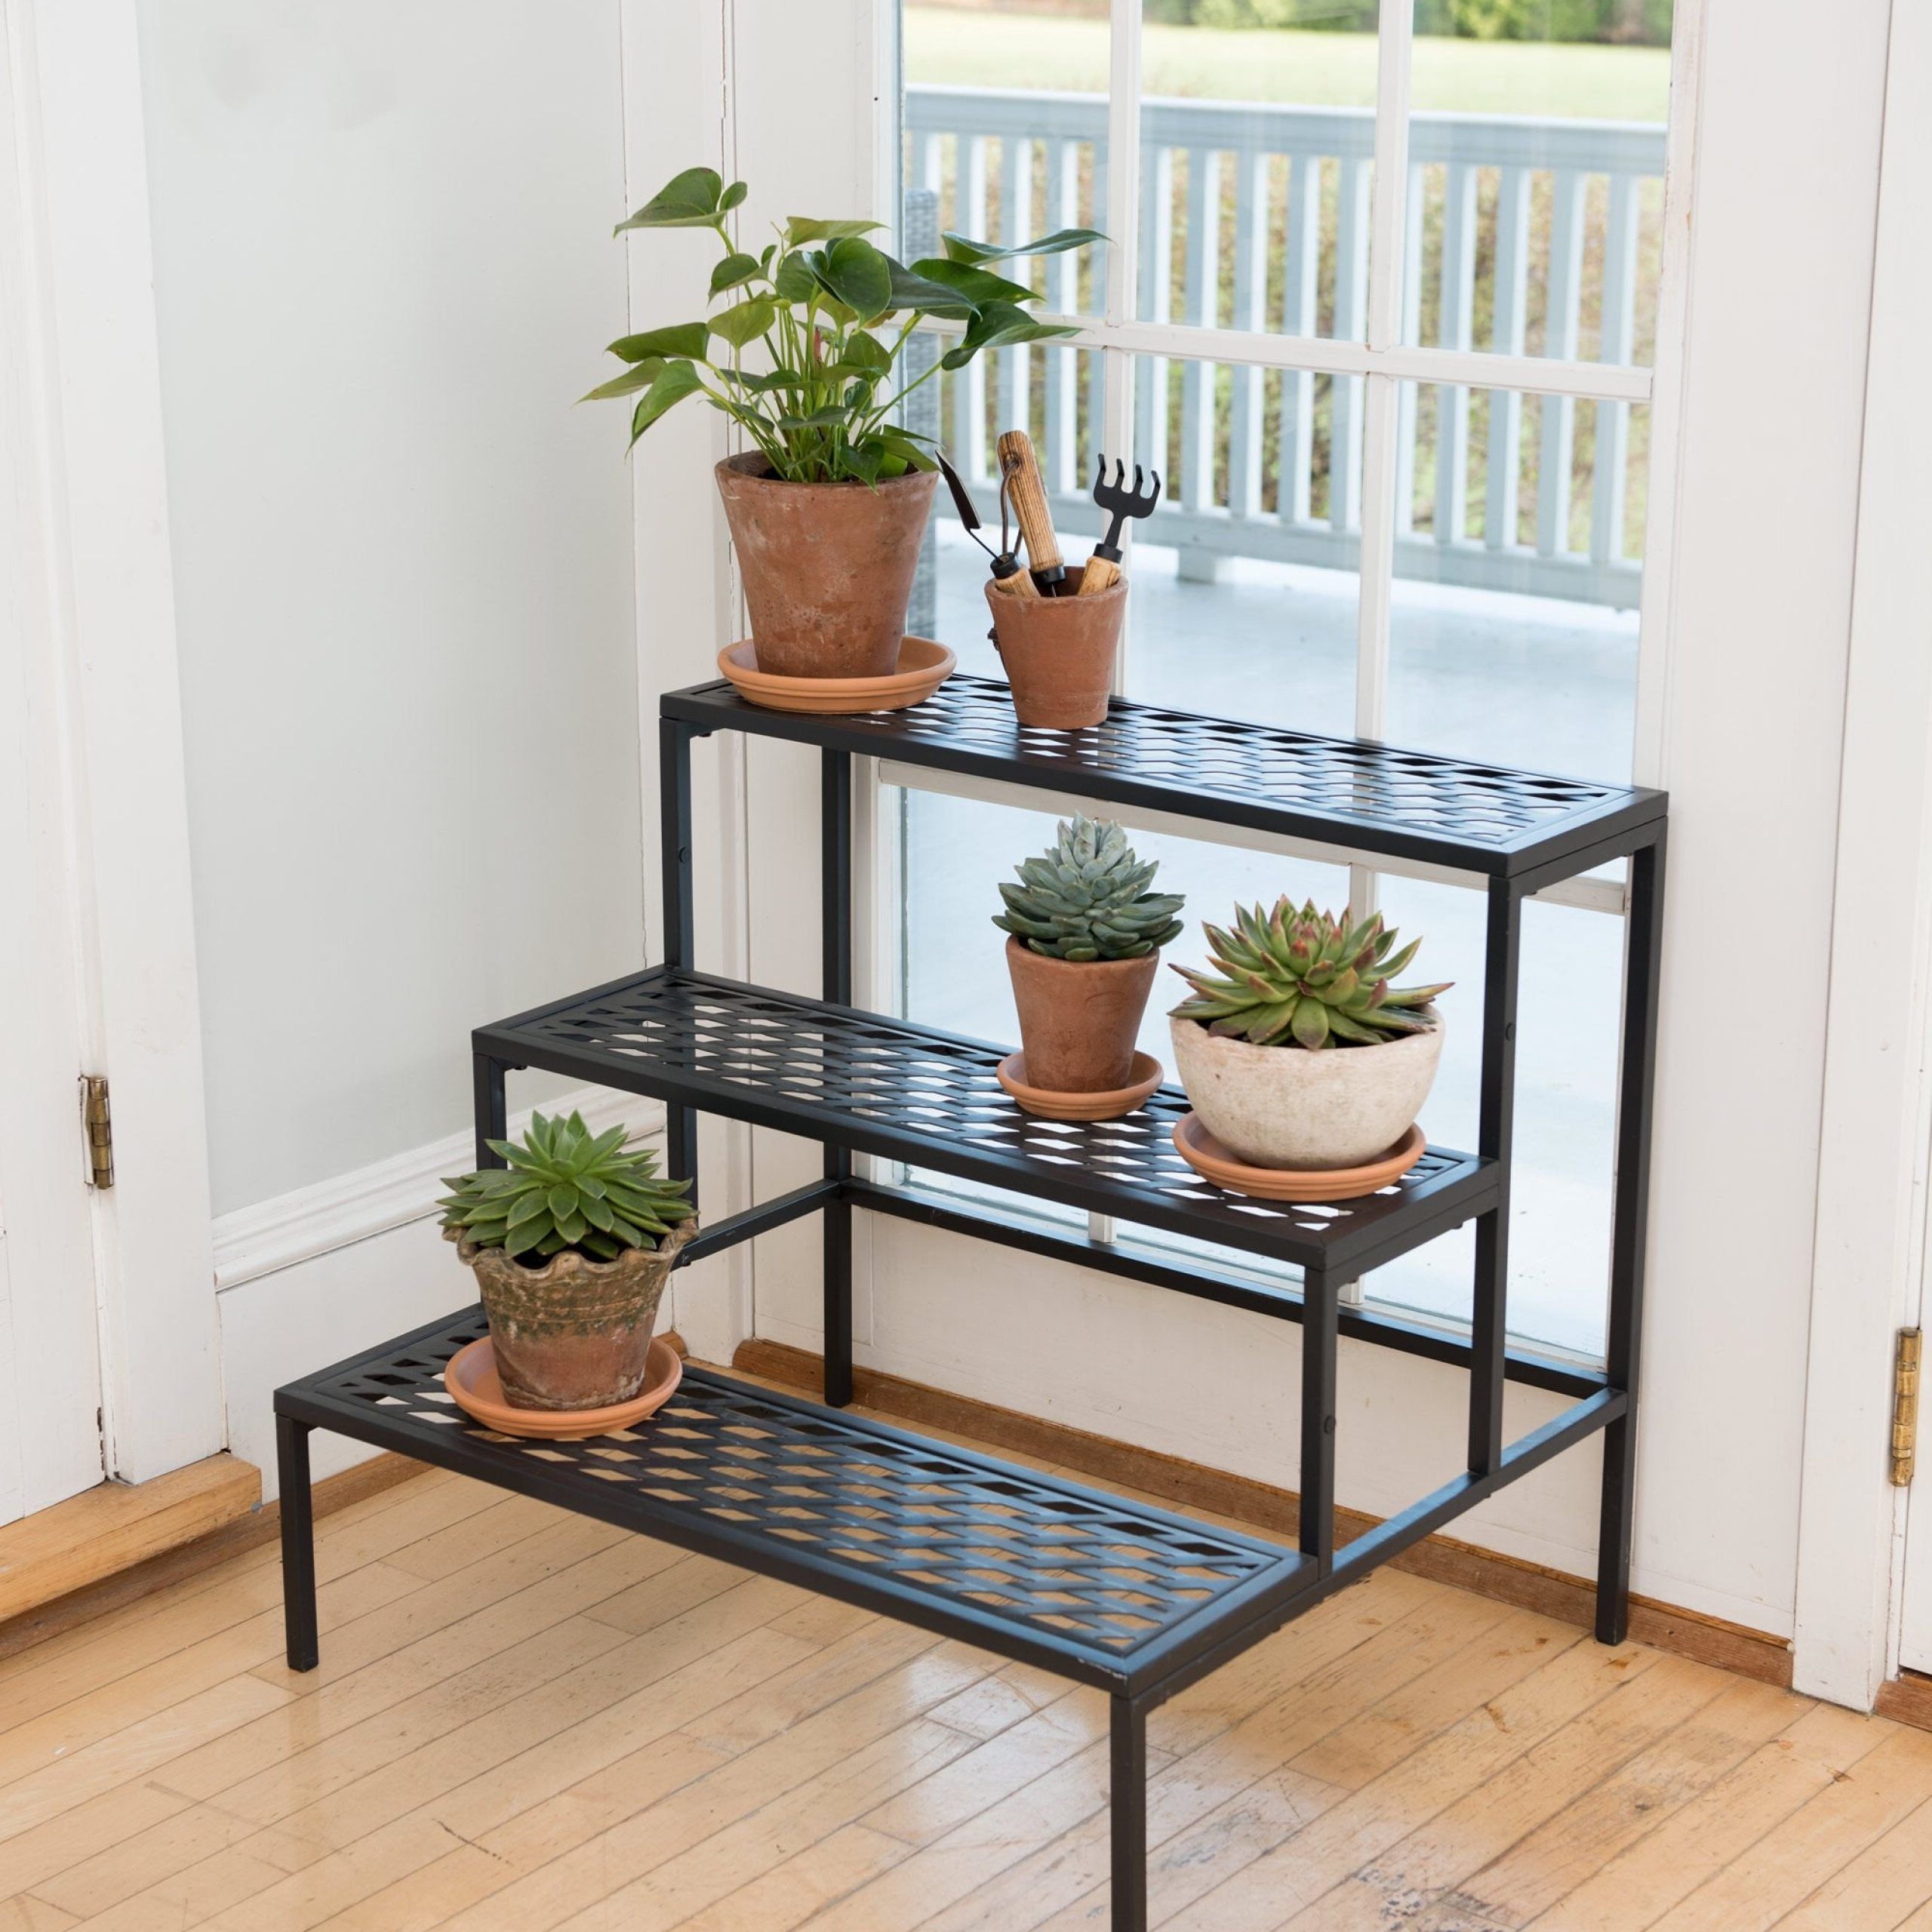 Gardener's Supply Within Current Three Tier Plant Stands (View 4 of 15)